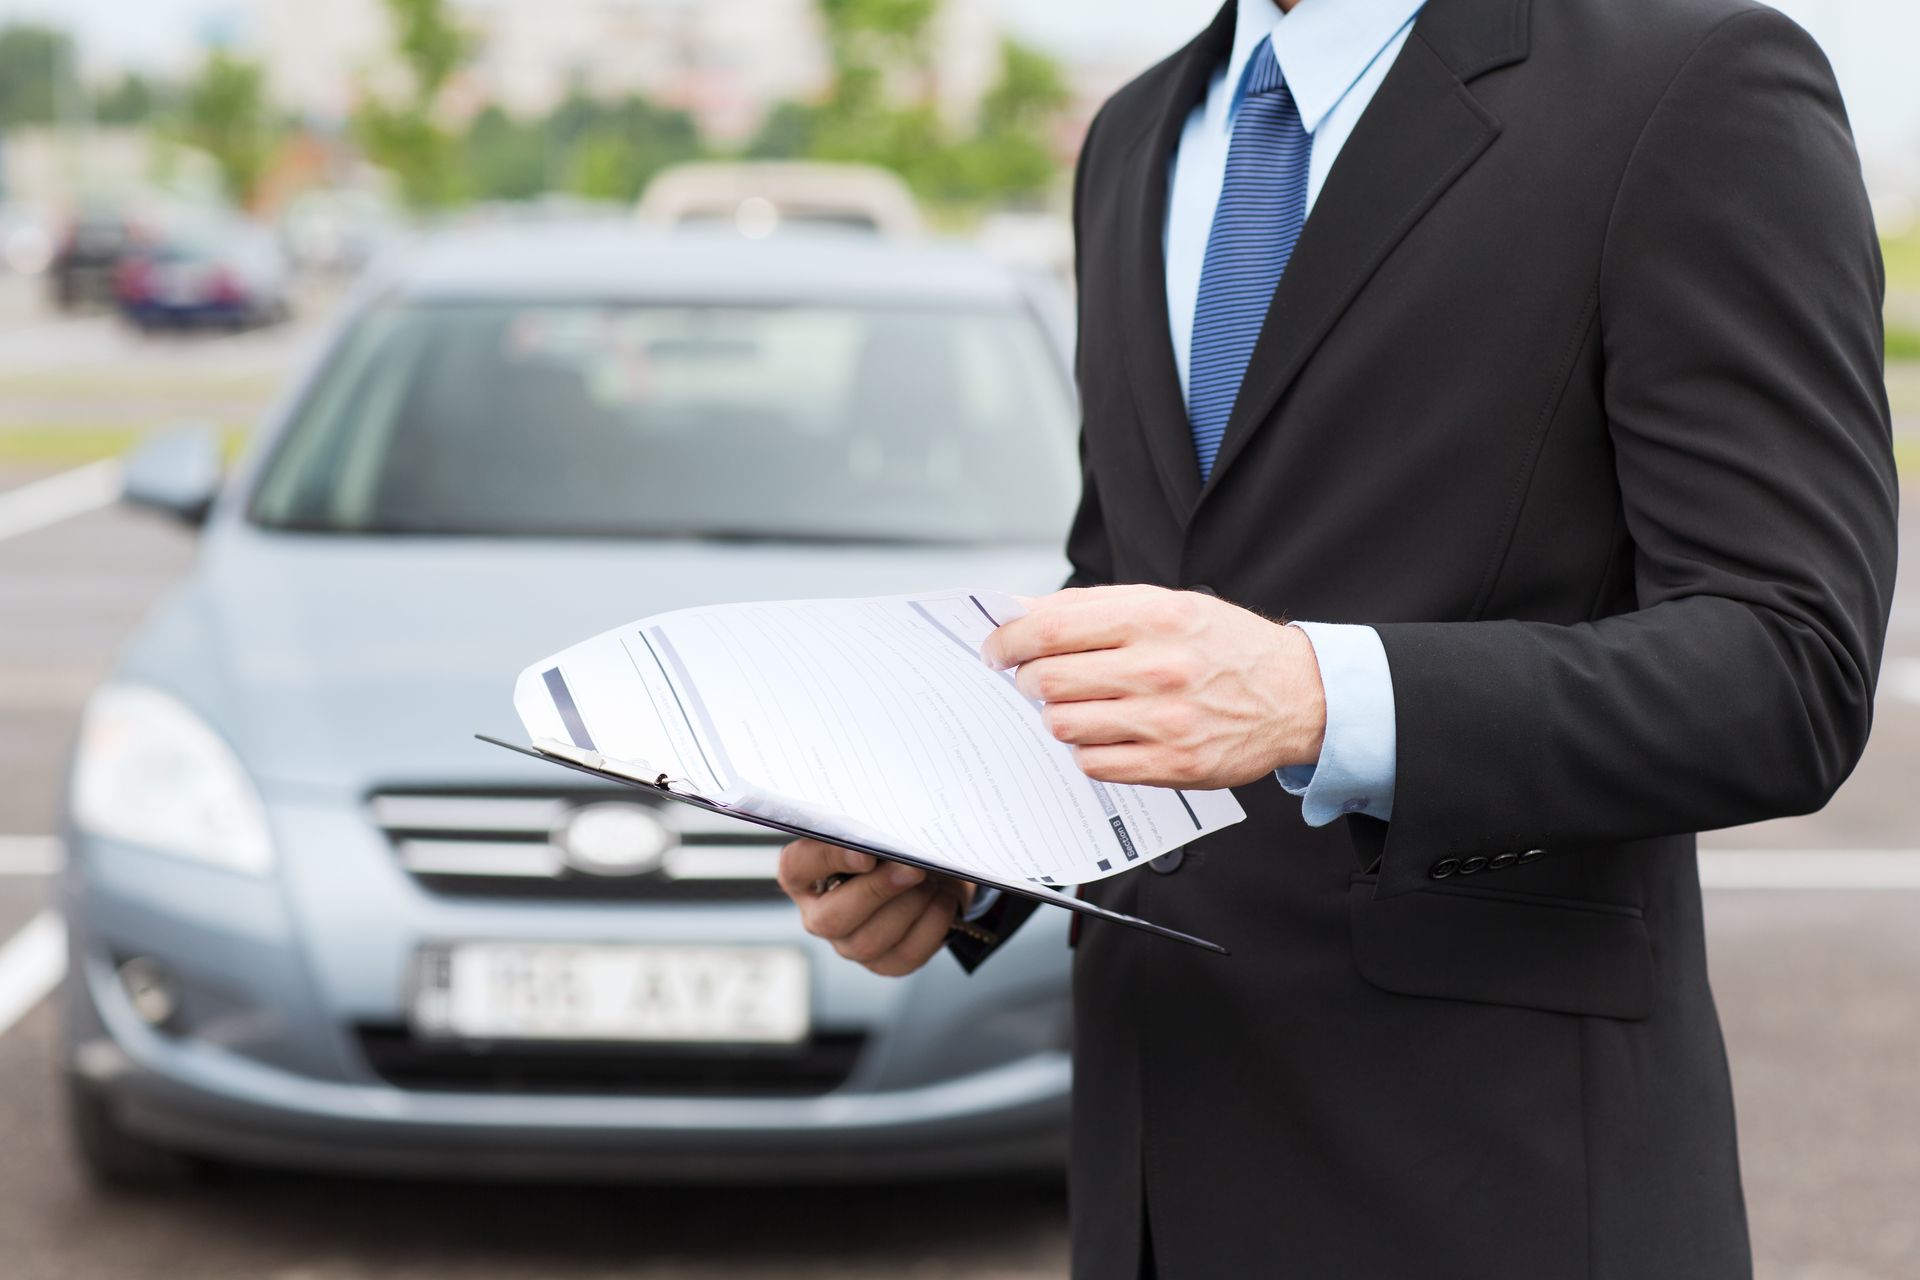 a man in a suit and tie is holding a clipboard in front of a car